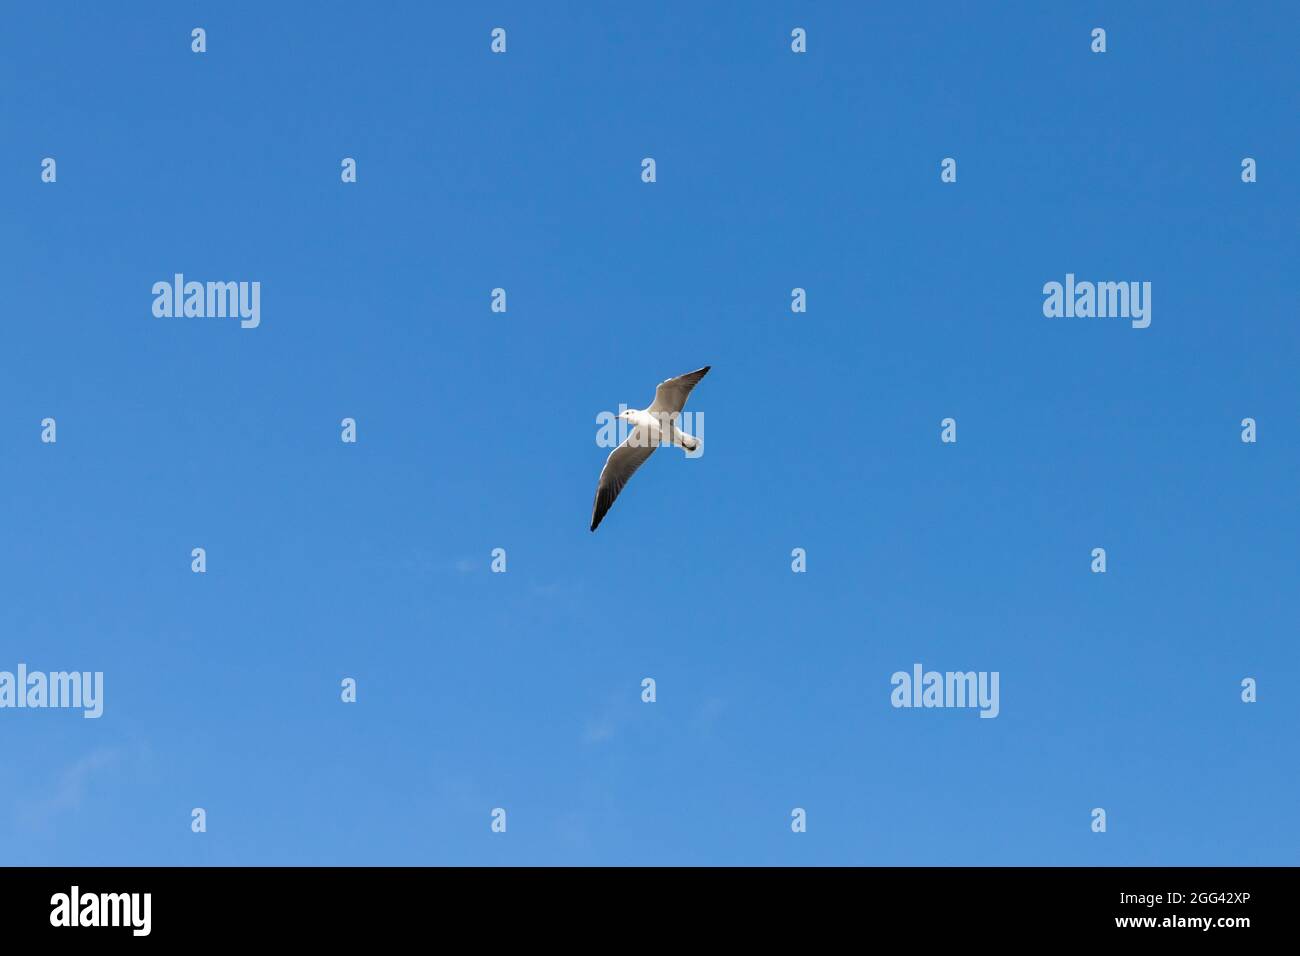 White seagull flies in clear blue sky, natural photo background Stock Photo